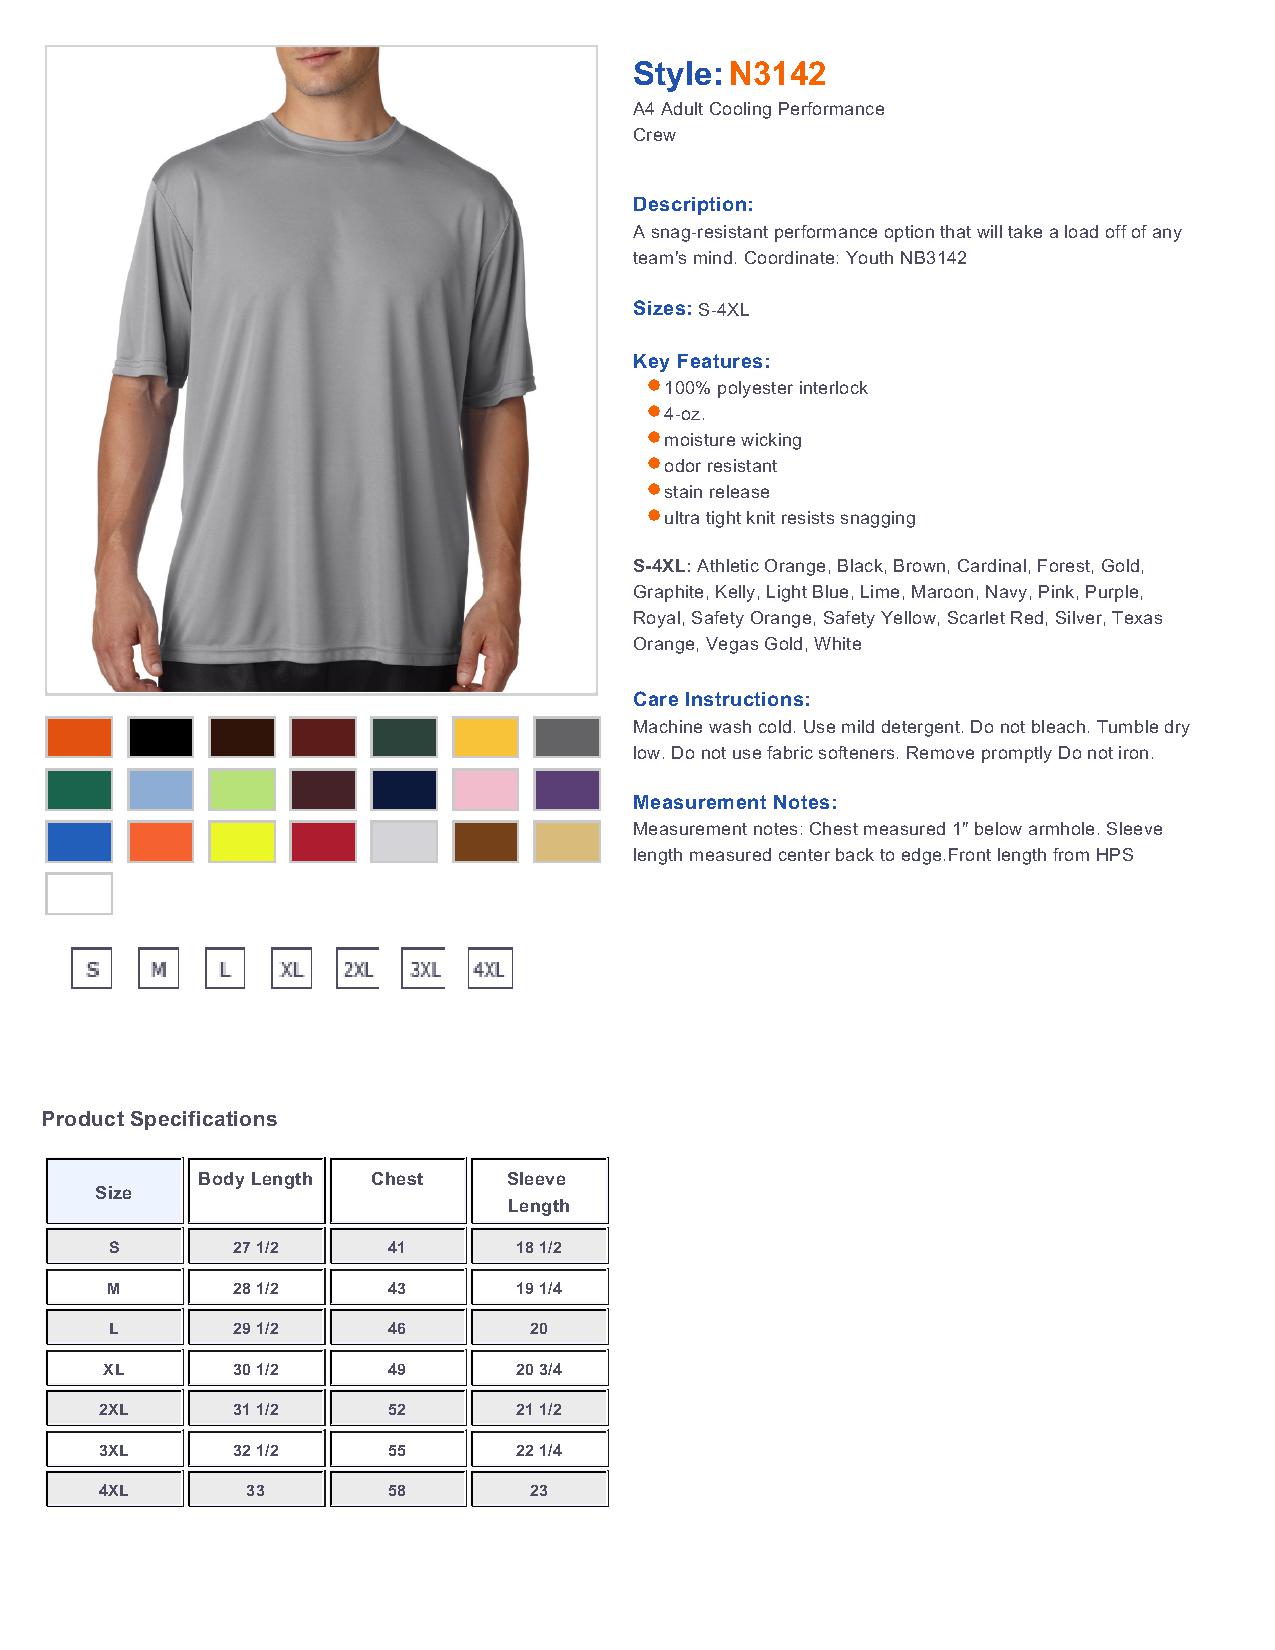 A4 N3142 - Adult Cooling Performance Tee $5.36 - T-Shirts